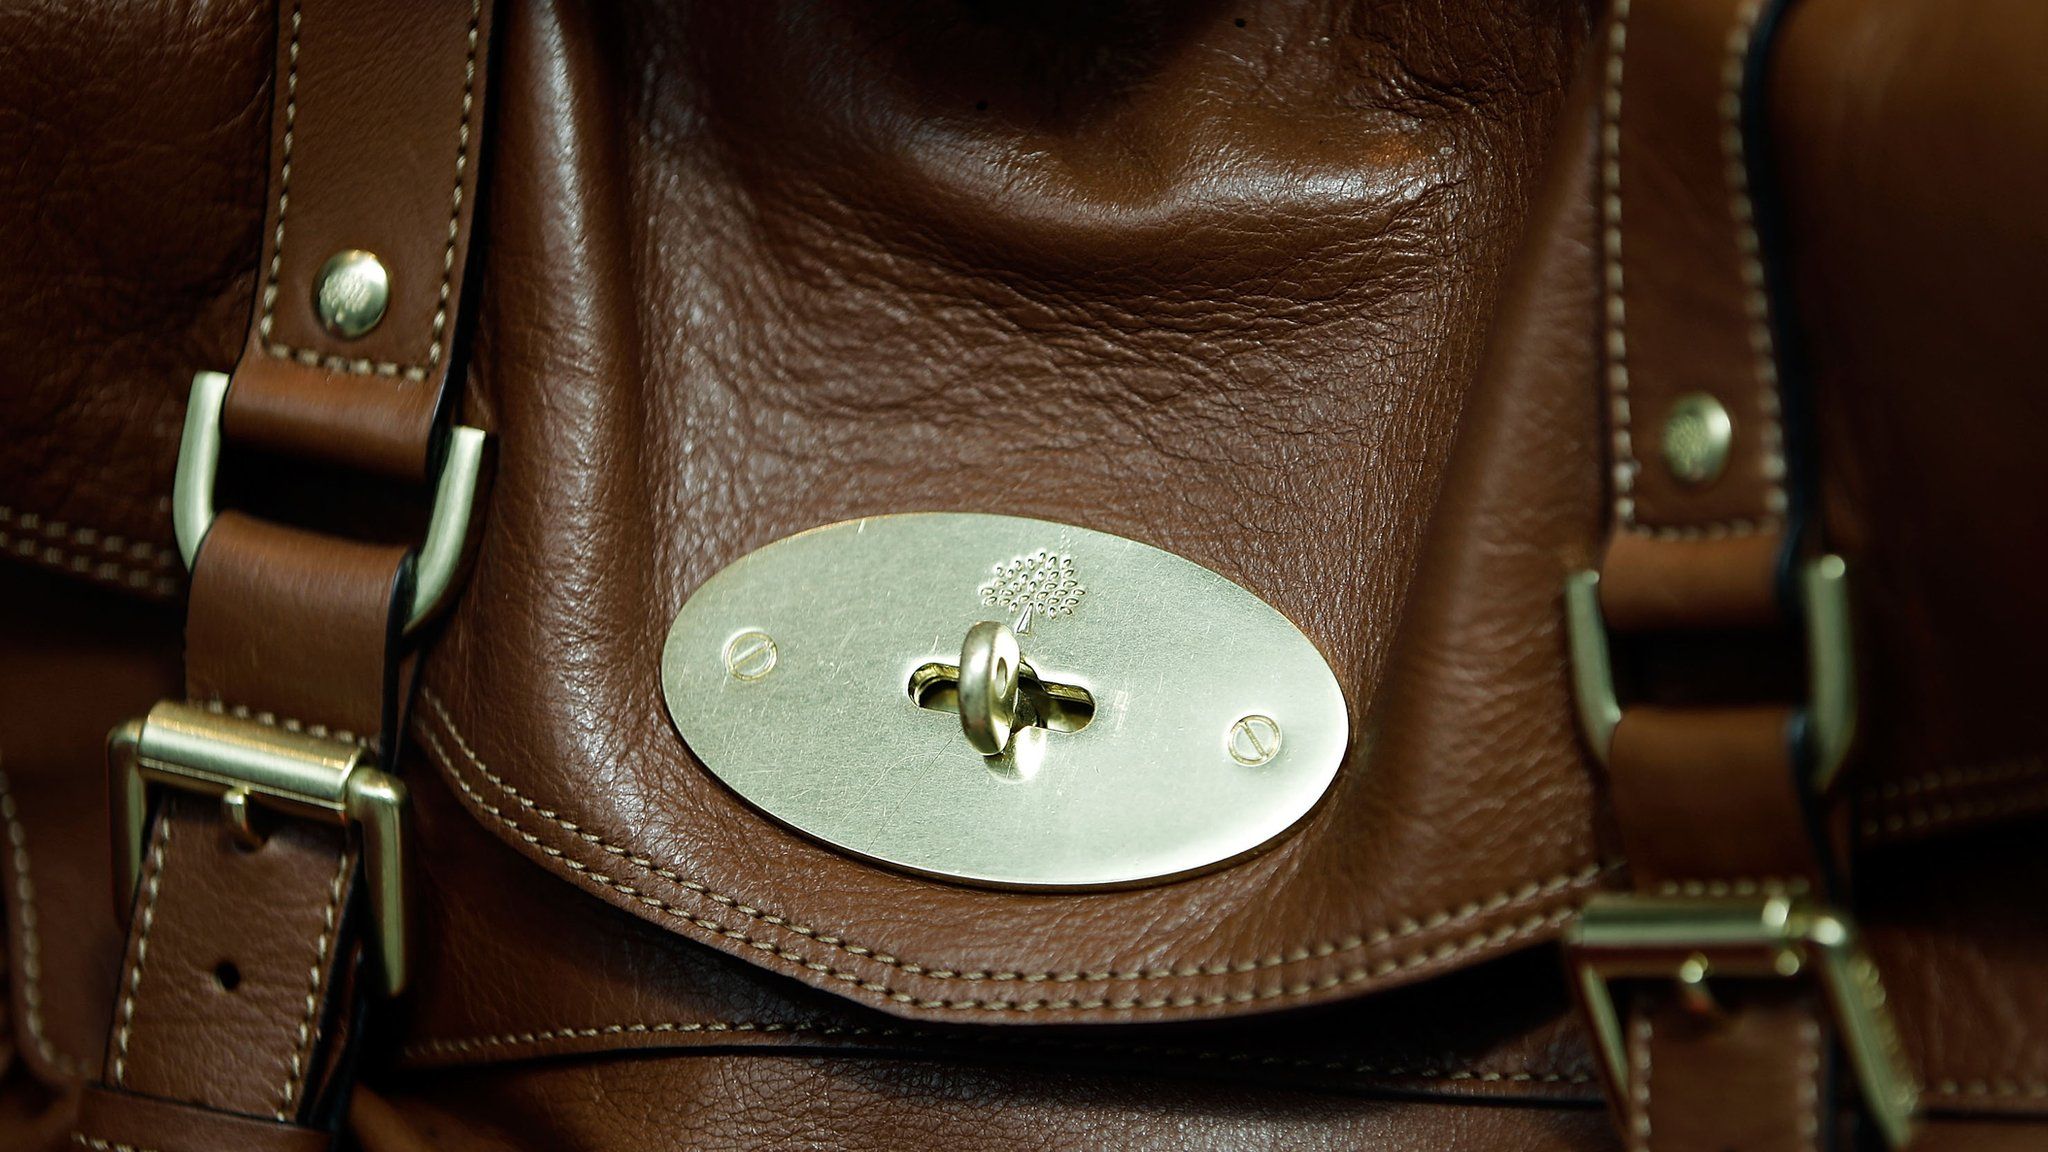 Close up of Mulberry logo on brown bag